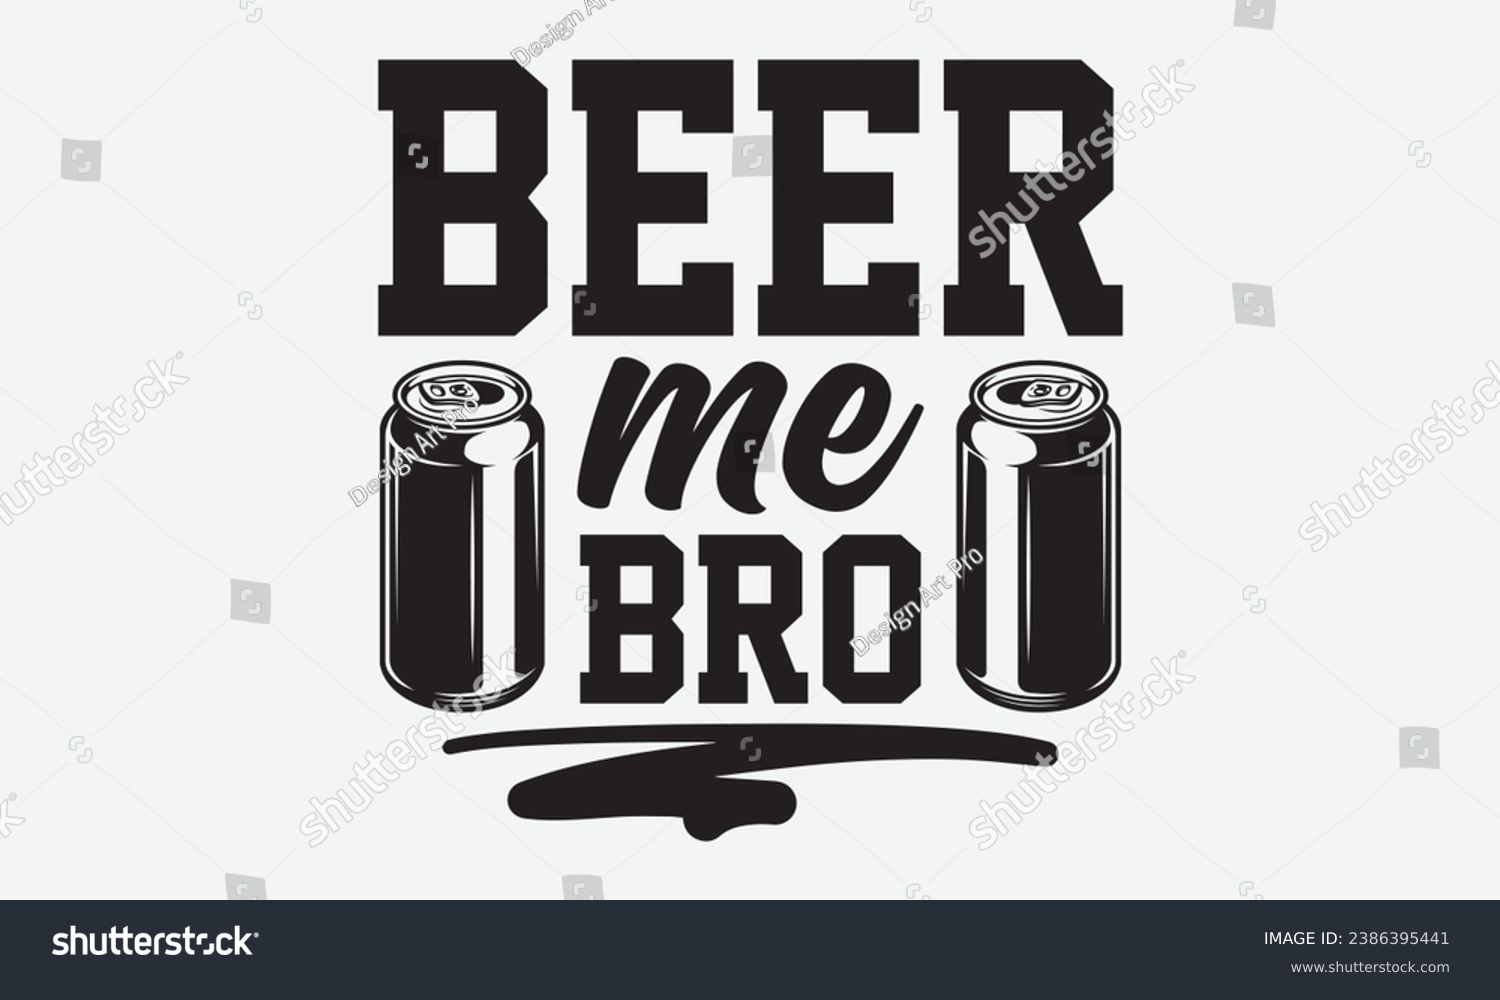 SVG of Beer Me Bro -Beer T-Shirt Design, Handmade Calligraphy Vector Illustration, For Wall, Mugs, Cutting Machine, Silhouette Cameo, Cricut. svg